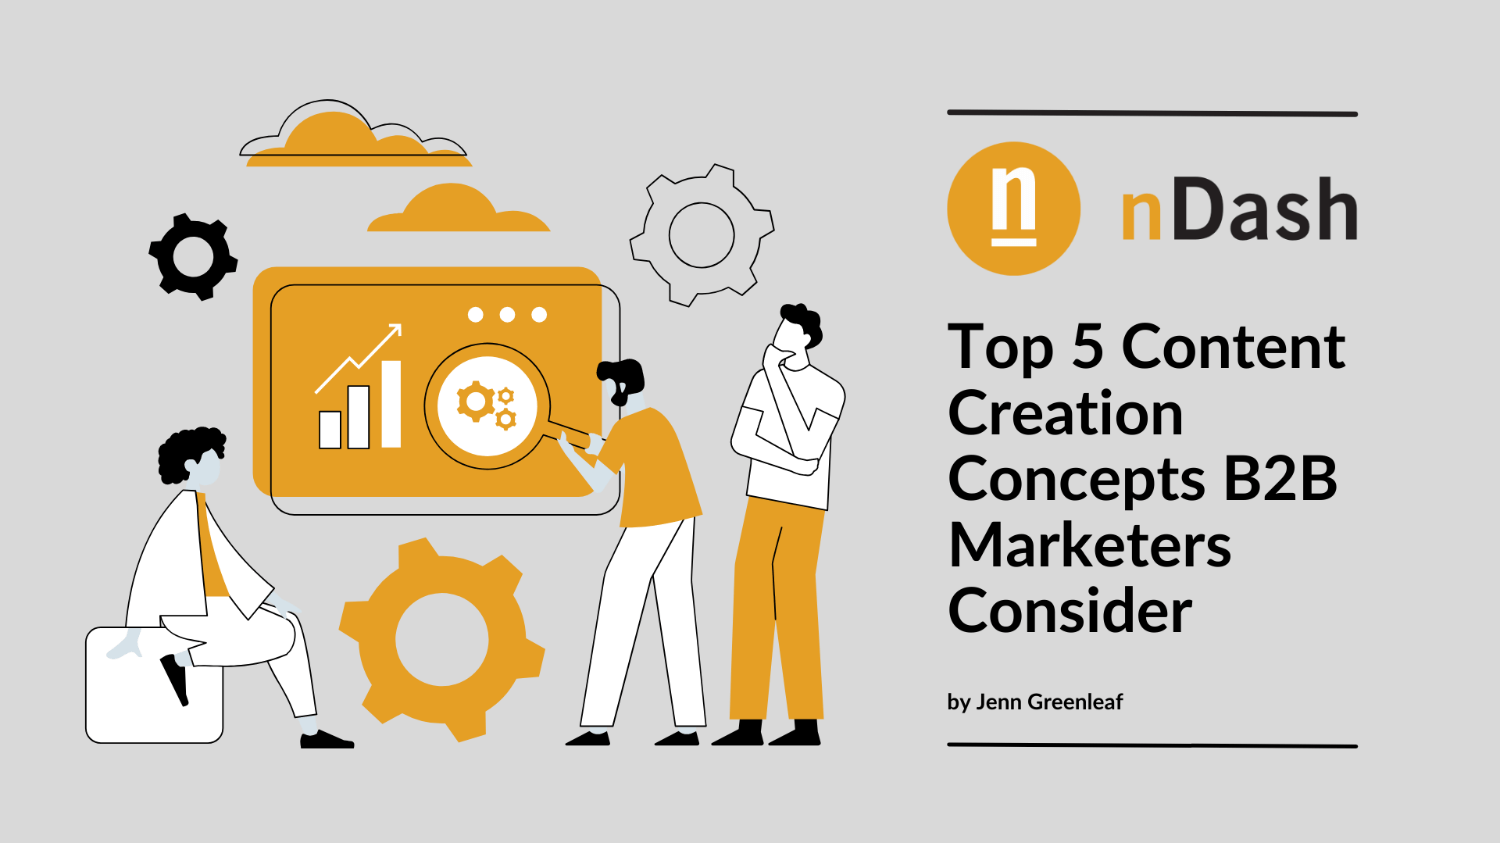 Top 5 Content Creation Concepts B2B Marketers Consider